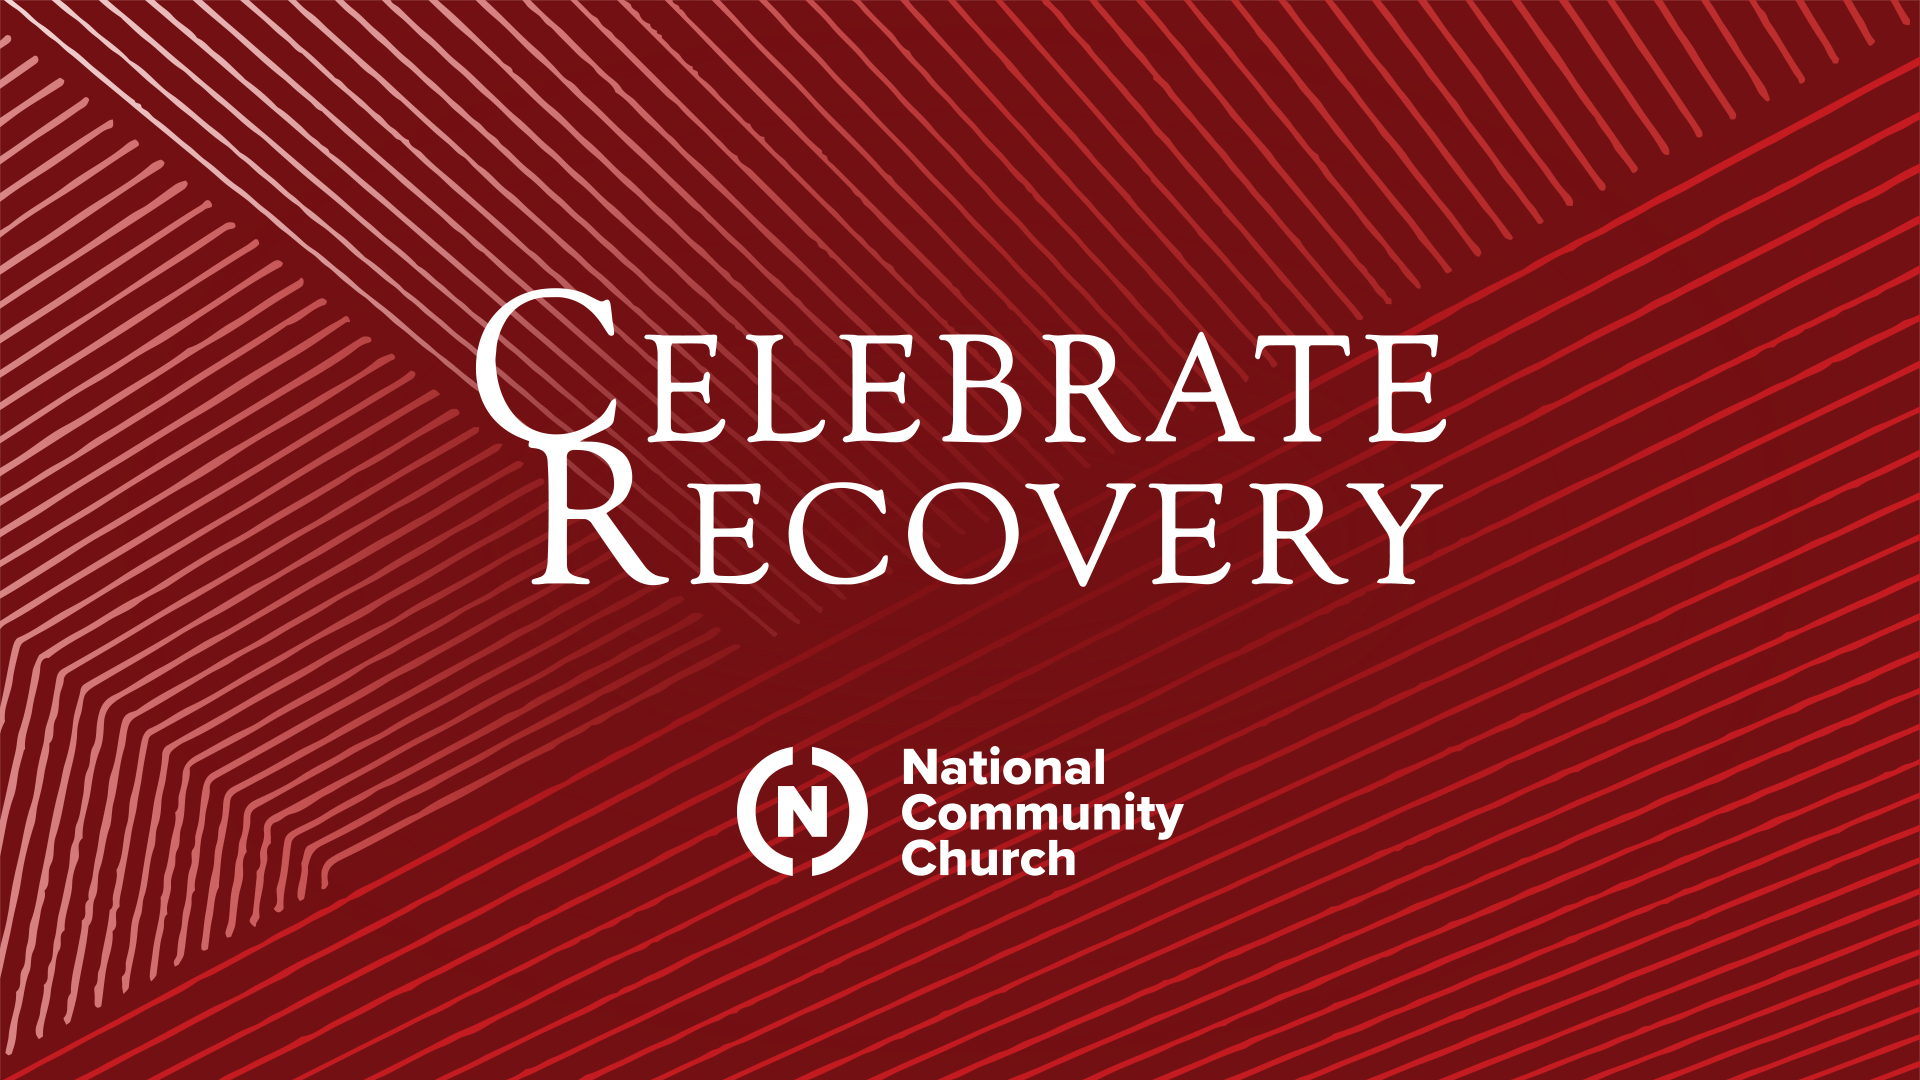 Celebrate Recovery meets Thursdays, has child care